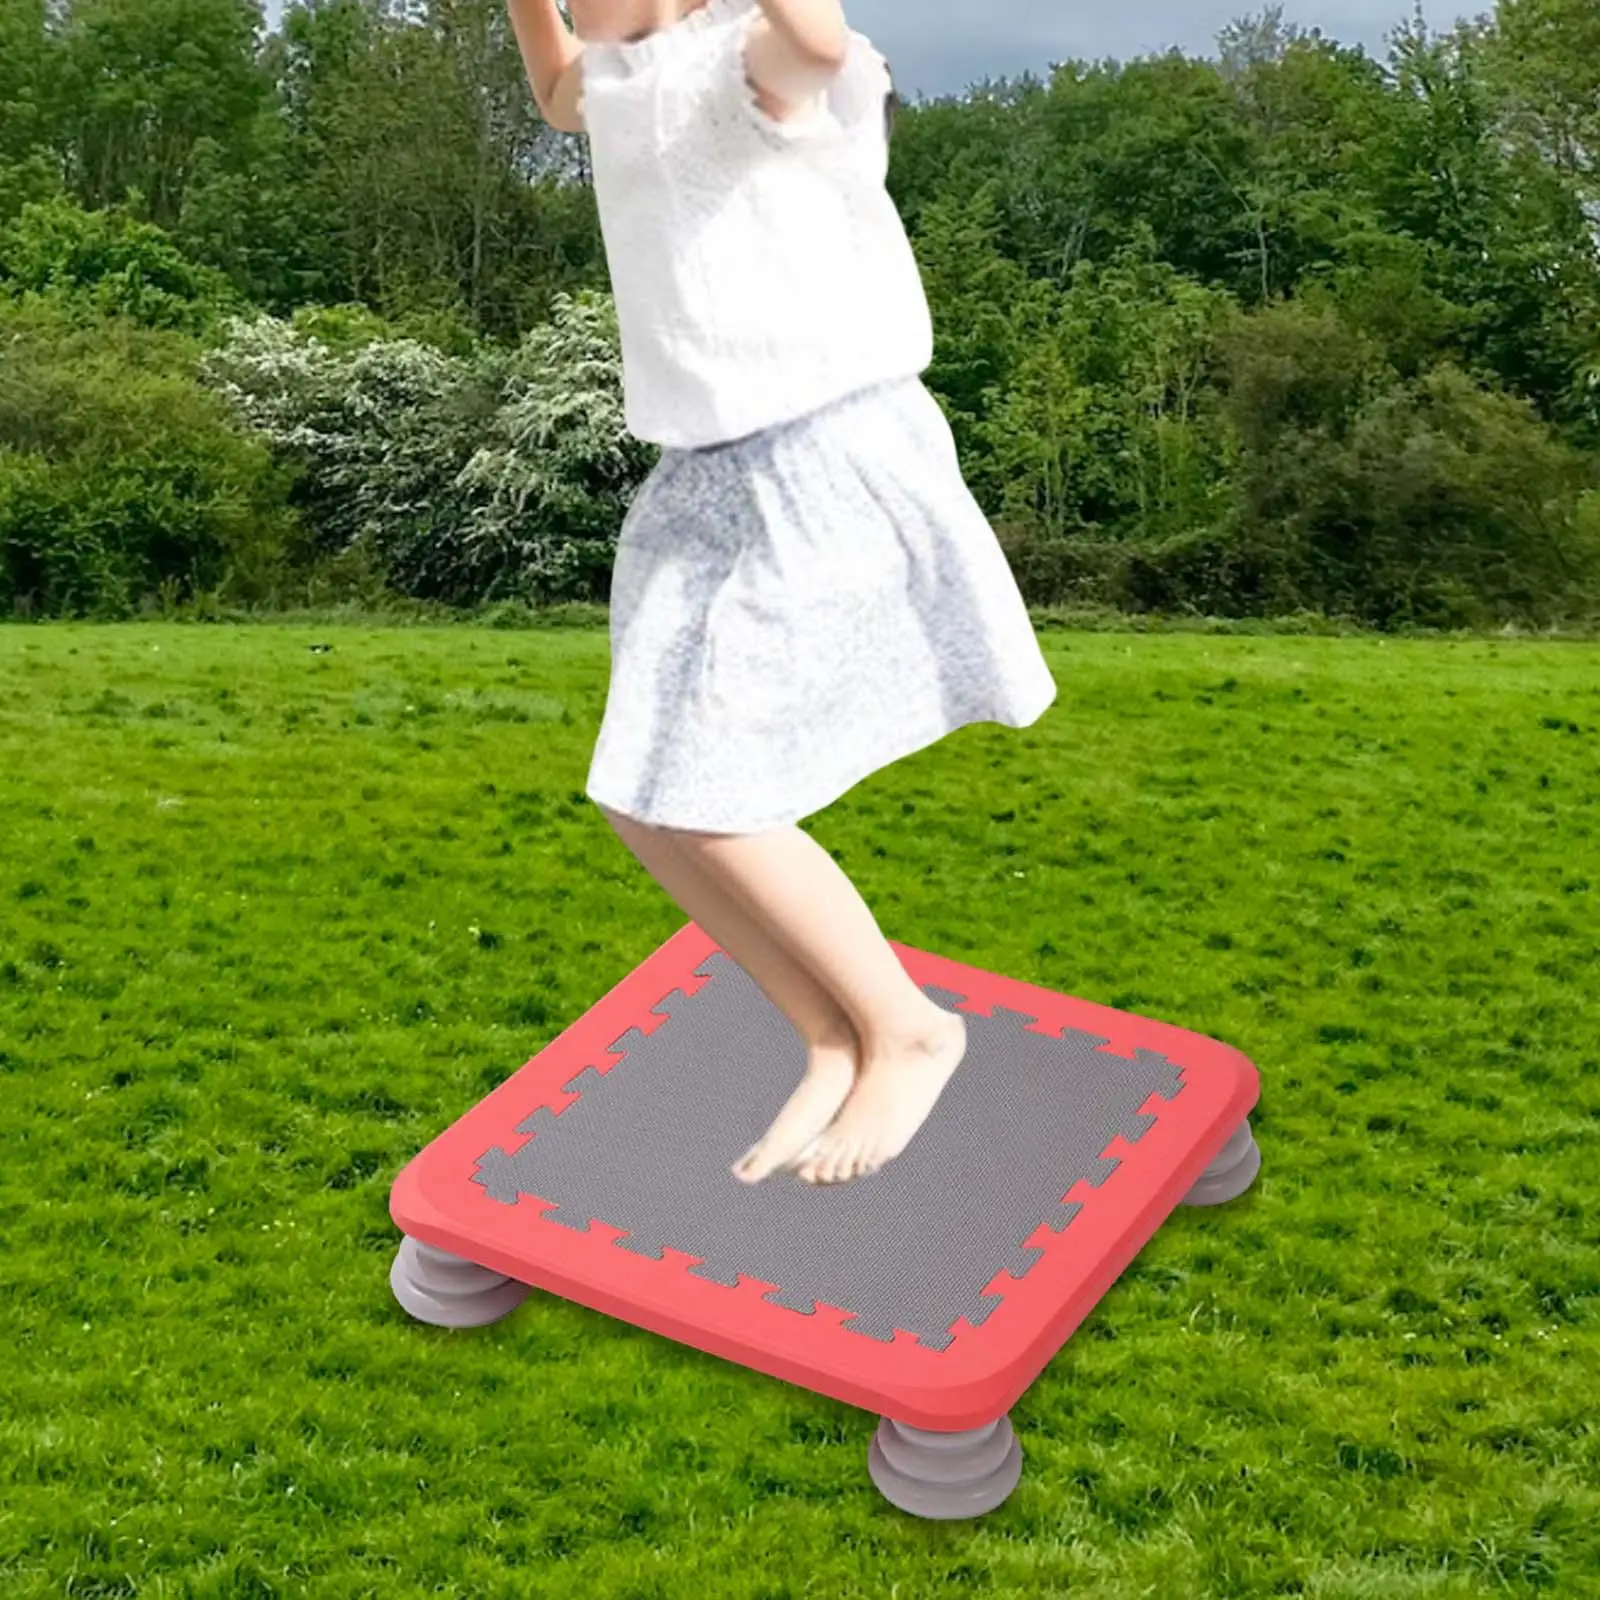 Portable Kids Trampoline Sports Jump Bouncing Bed for Children Home Outdoor